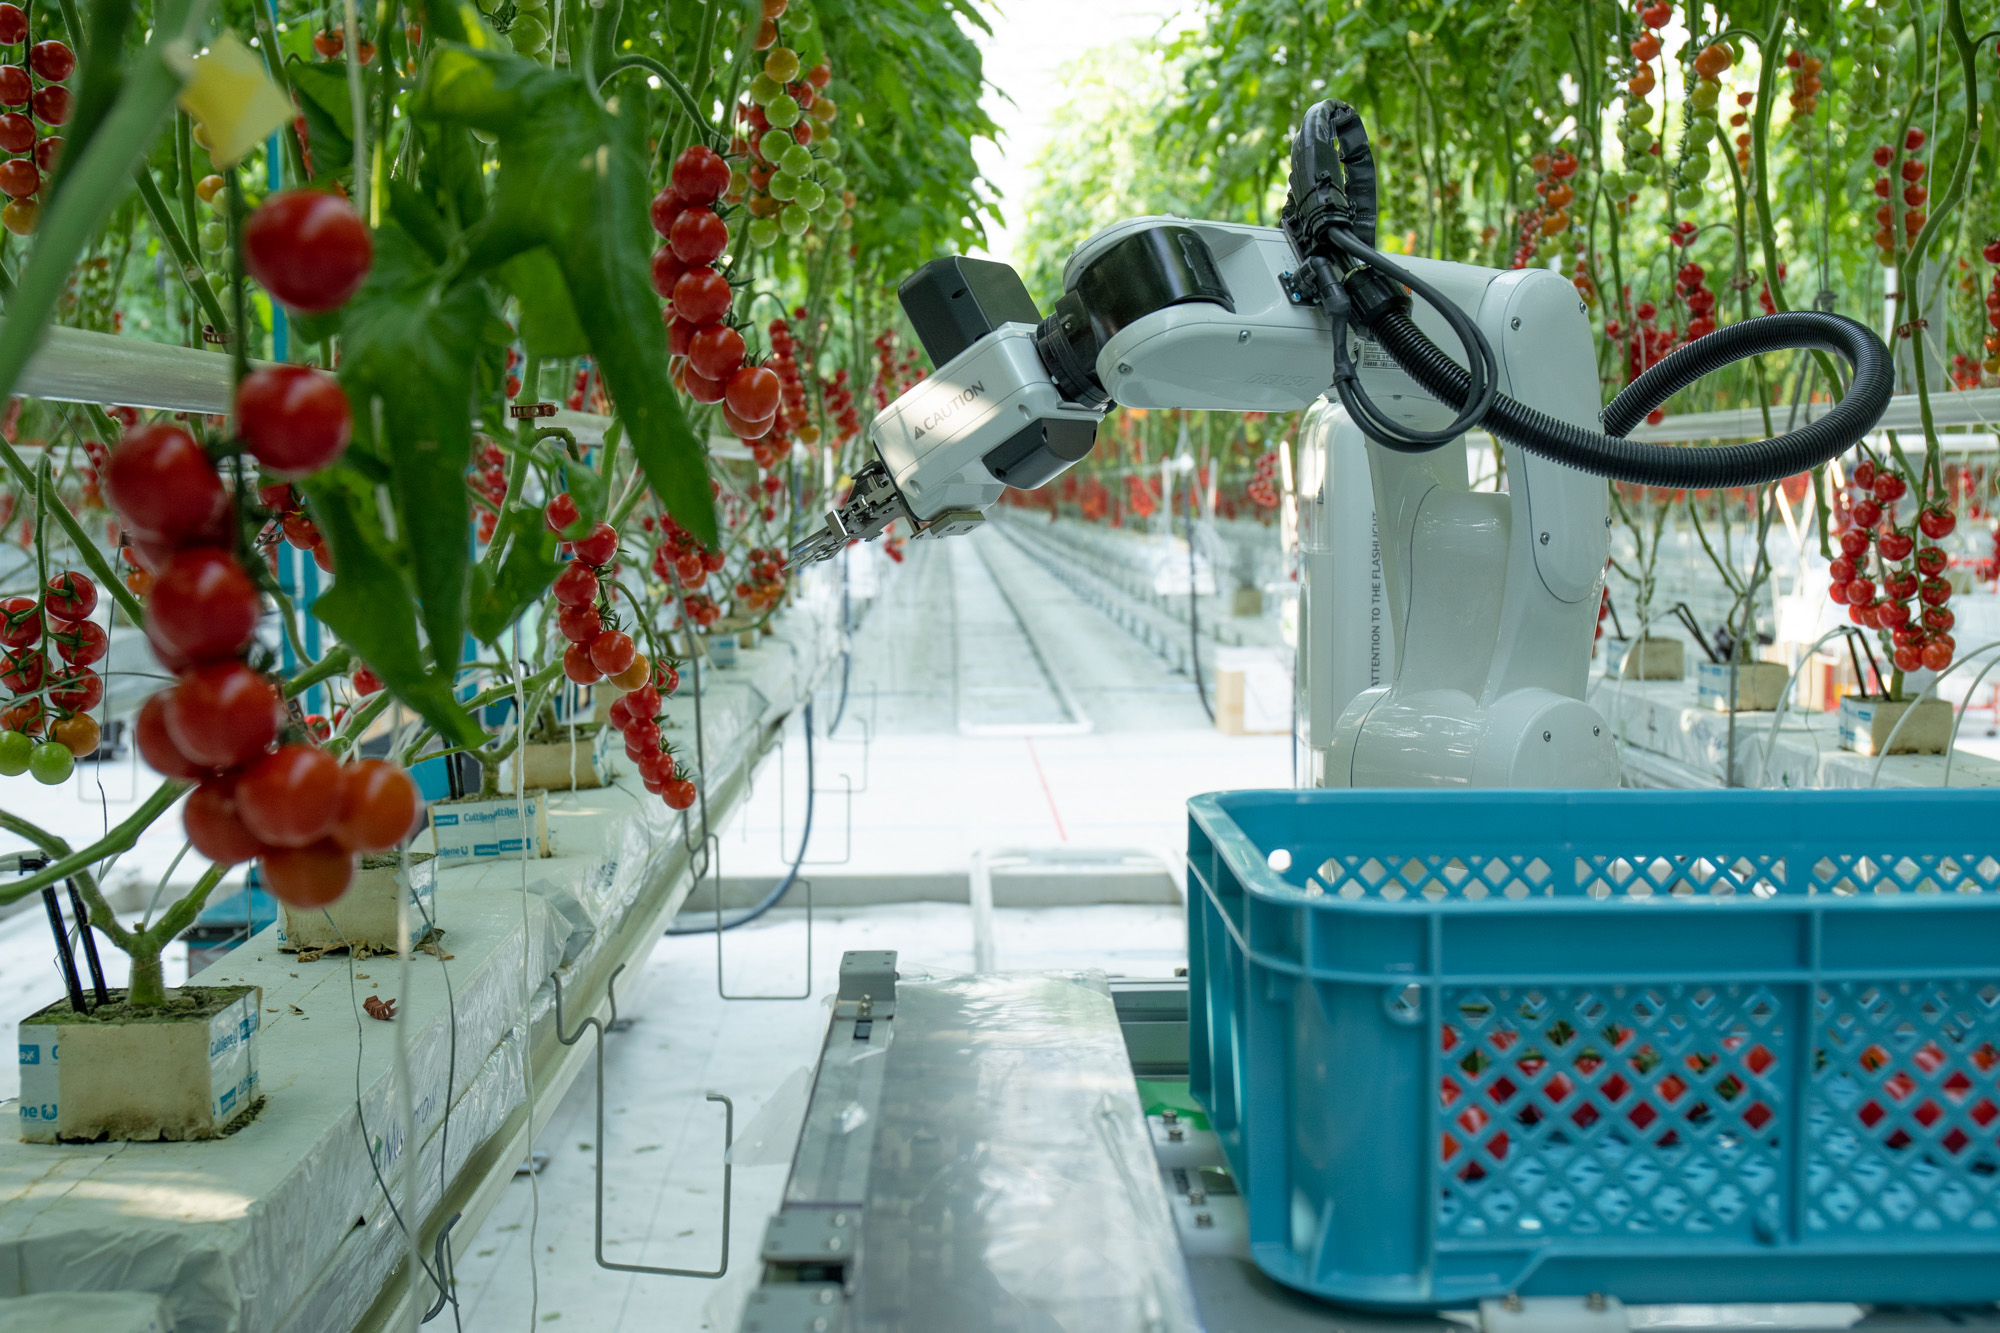 robots in agrotech